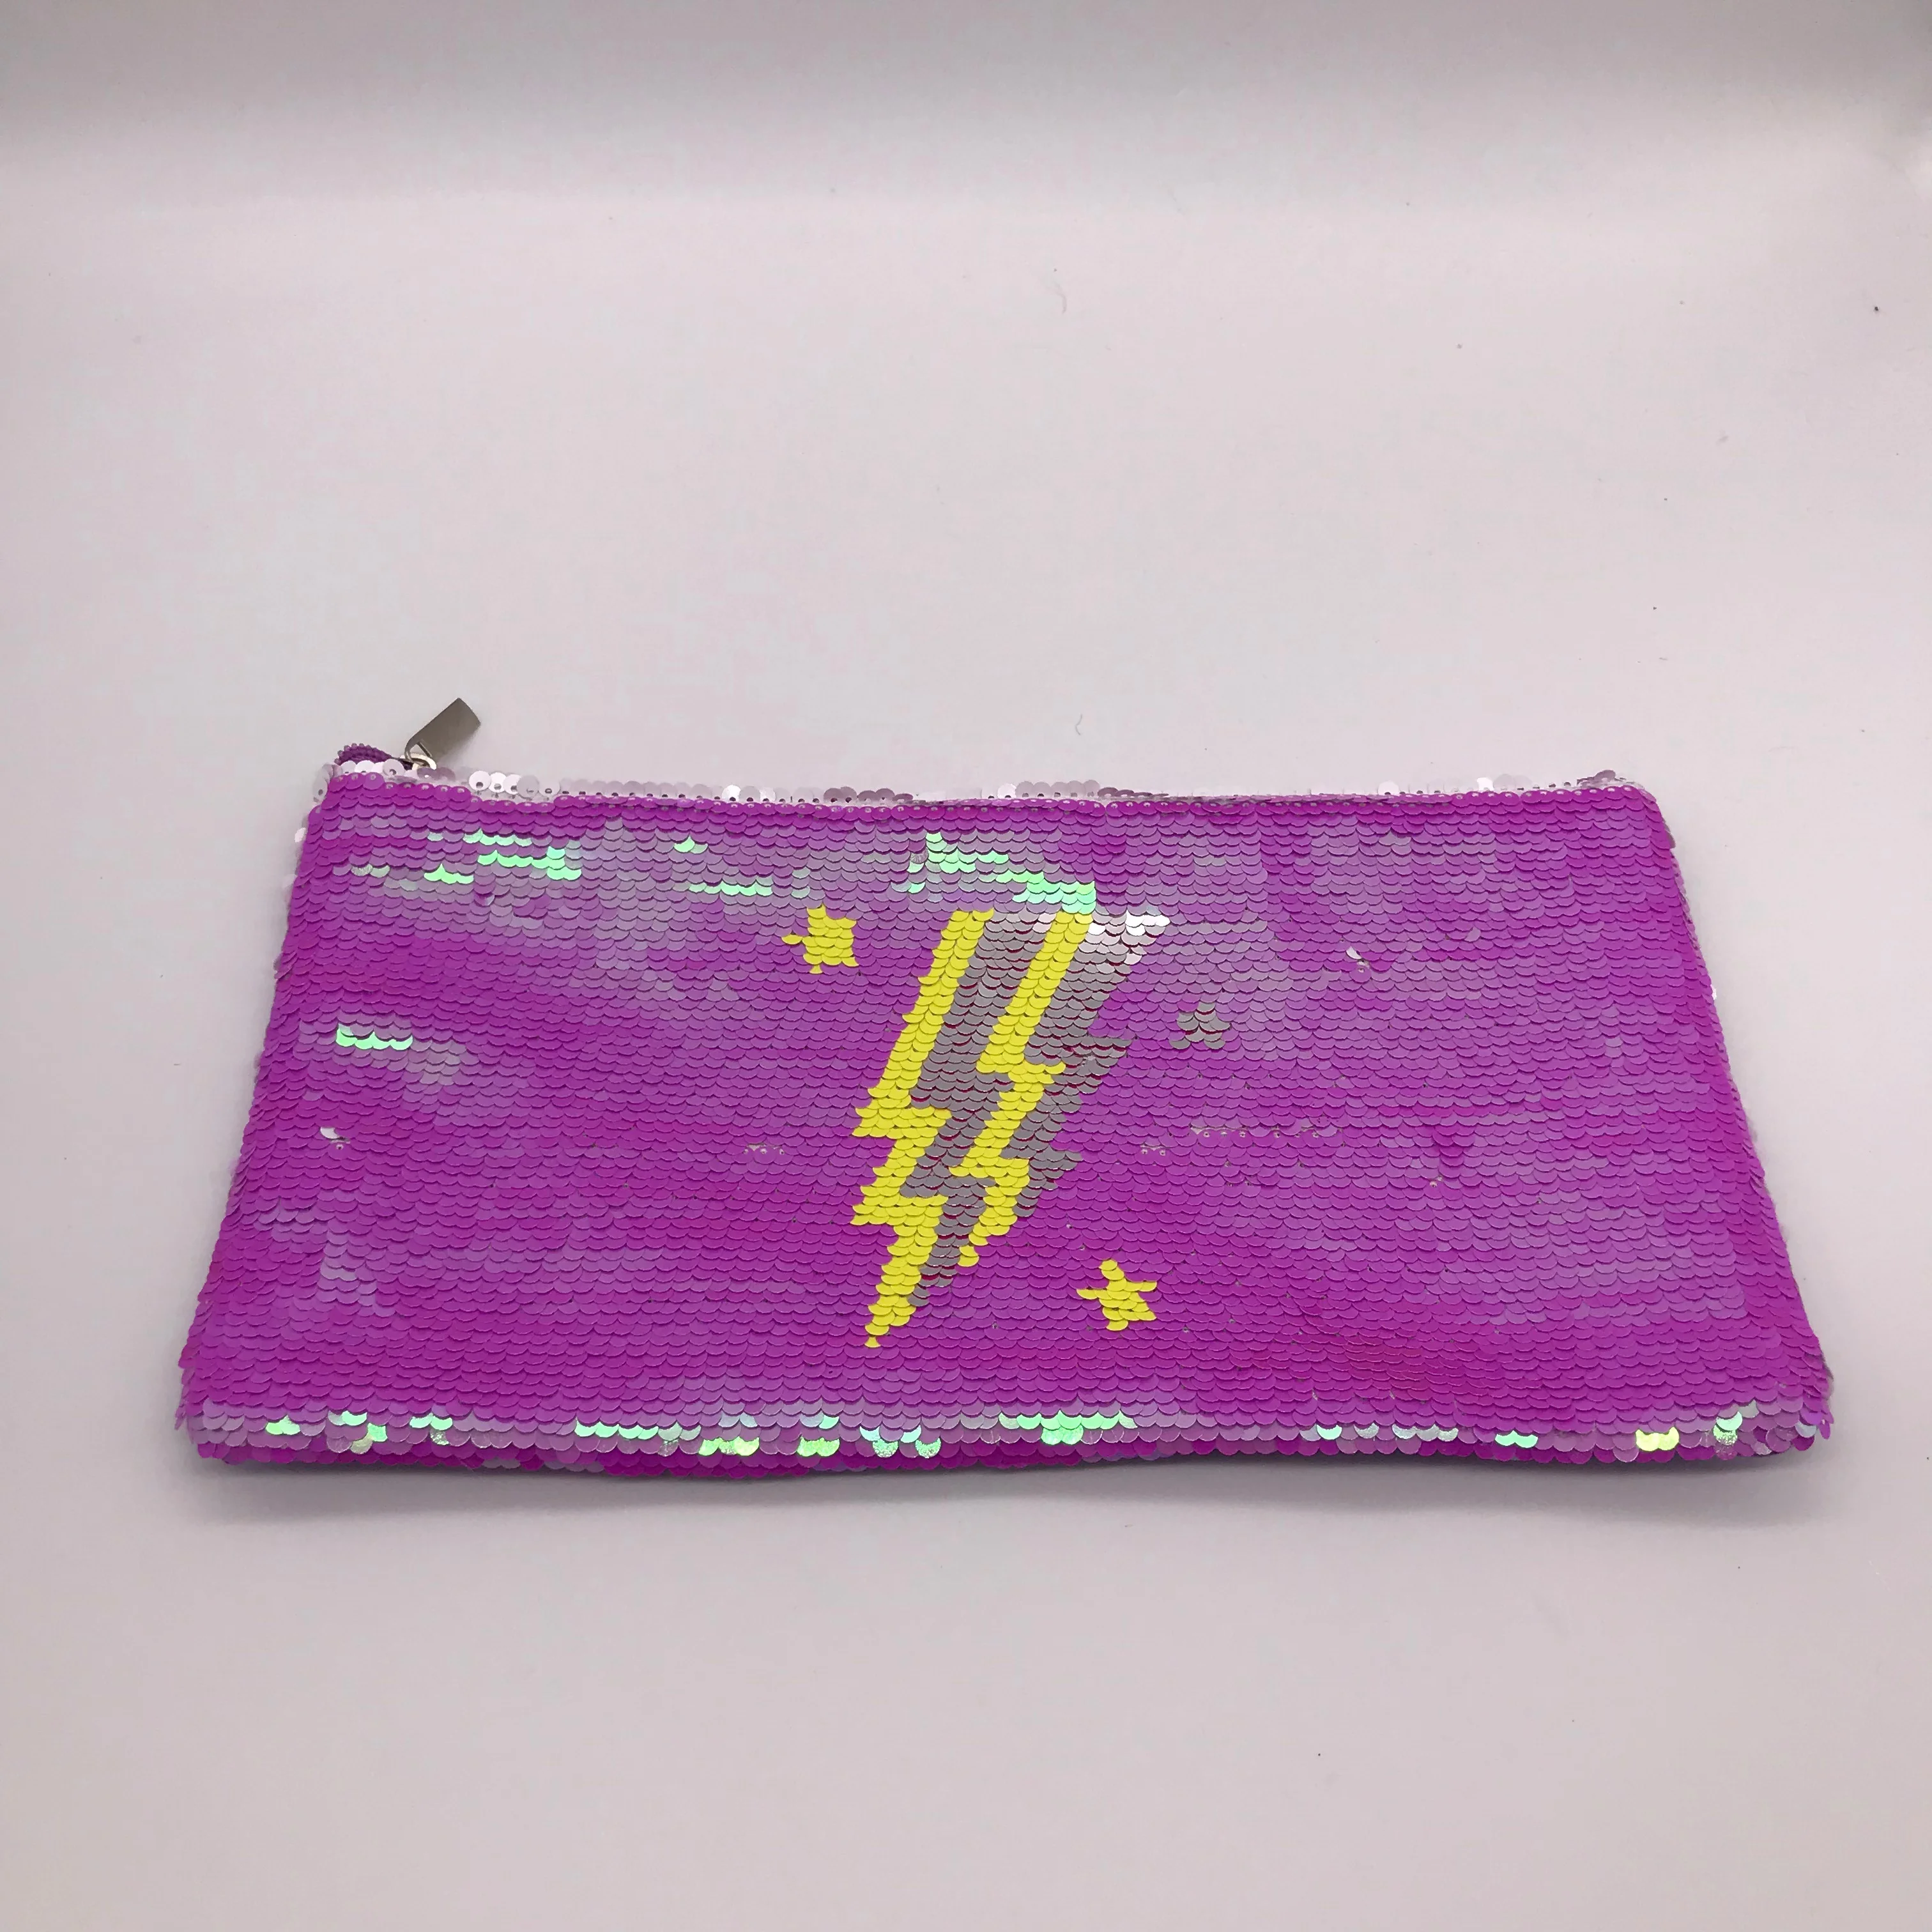 Cool Lightning Style Sequin Pencil Case With Zipper Buy Lightning Sequin Pencil Case Cool Sequin Pencil Case Sequin Pencil Case With Zipper Product On Alibaba Com